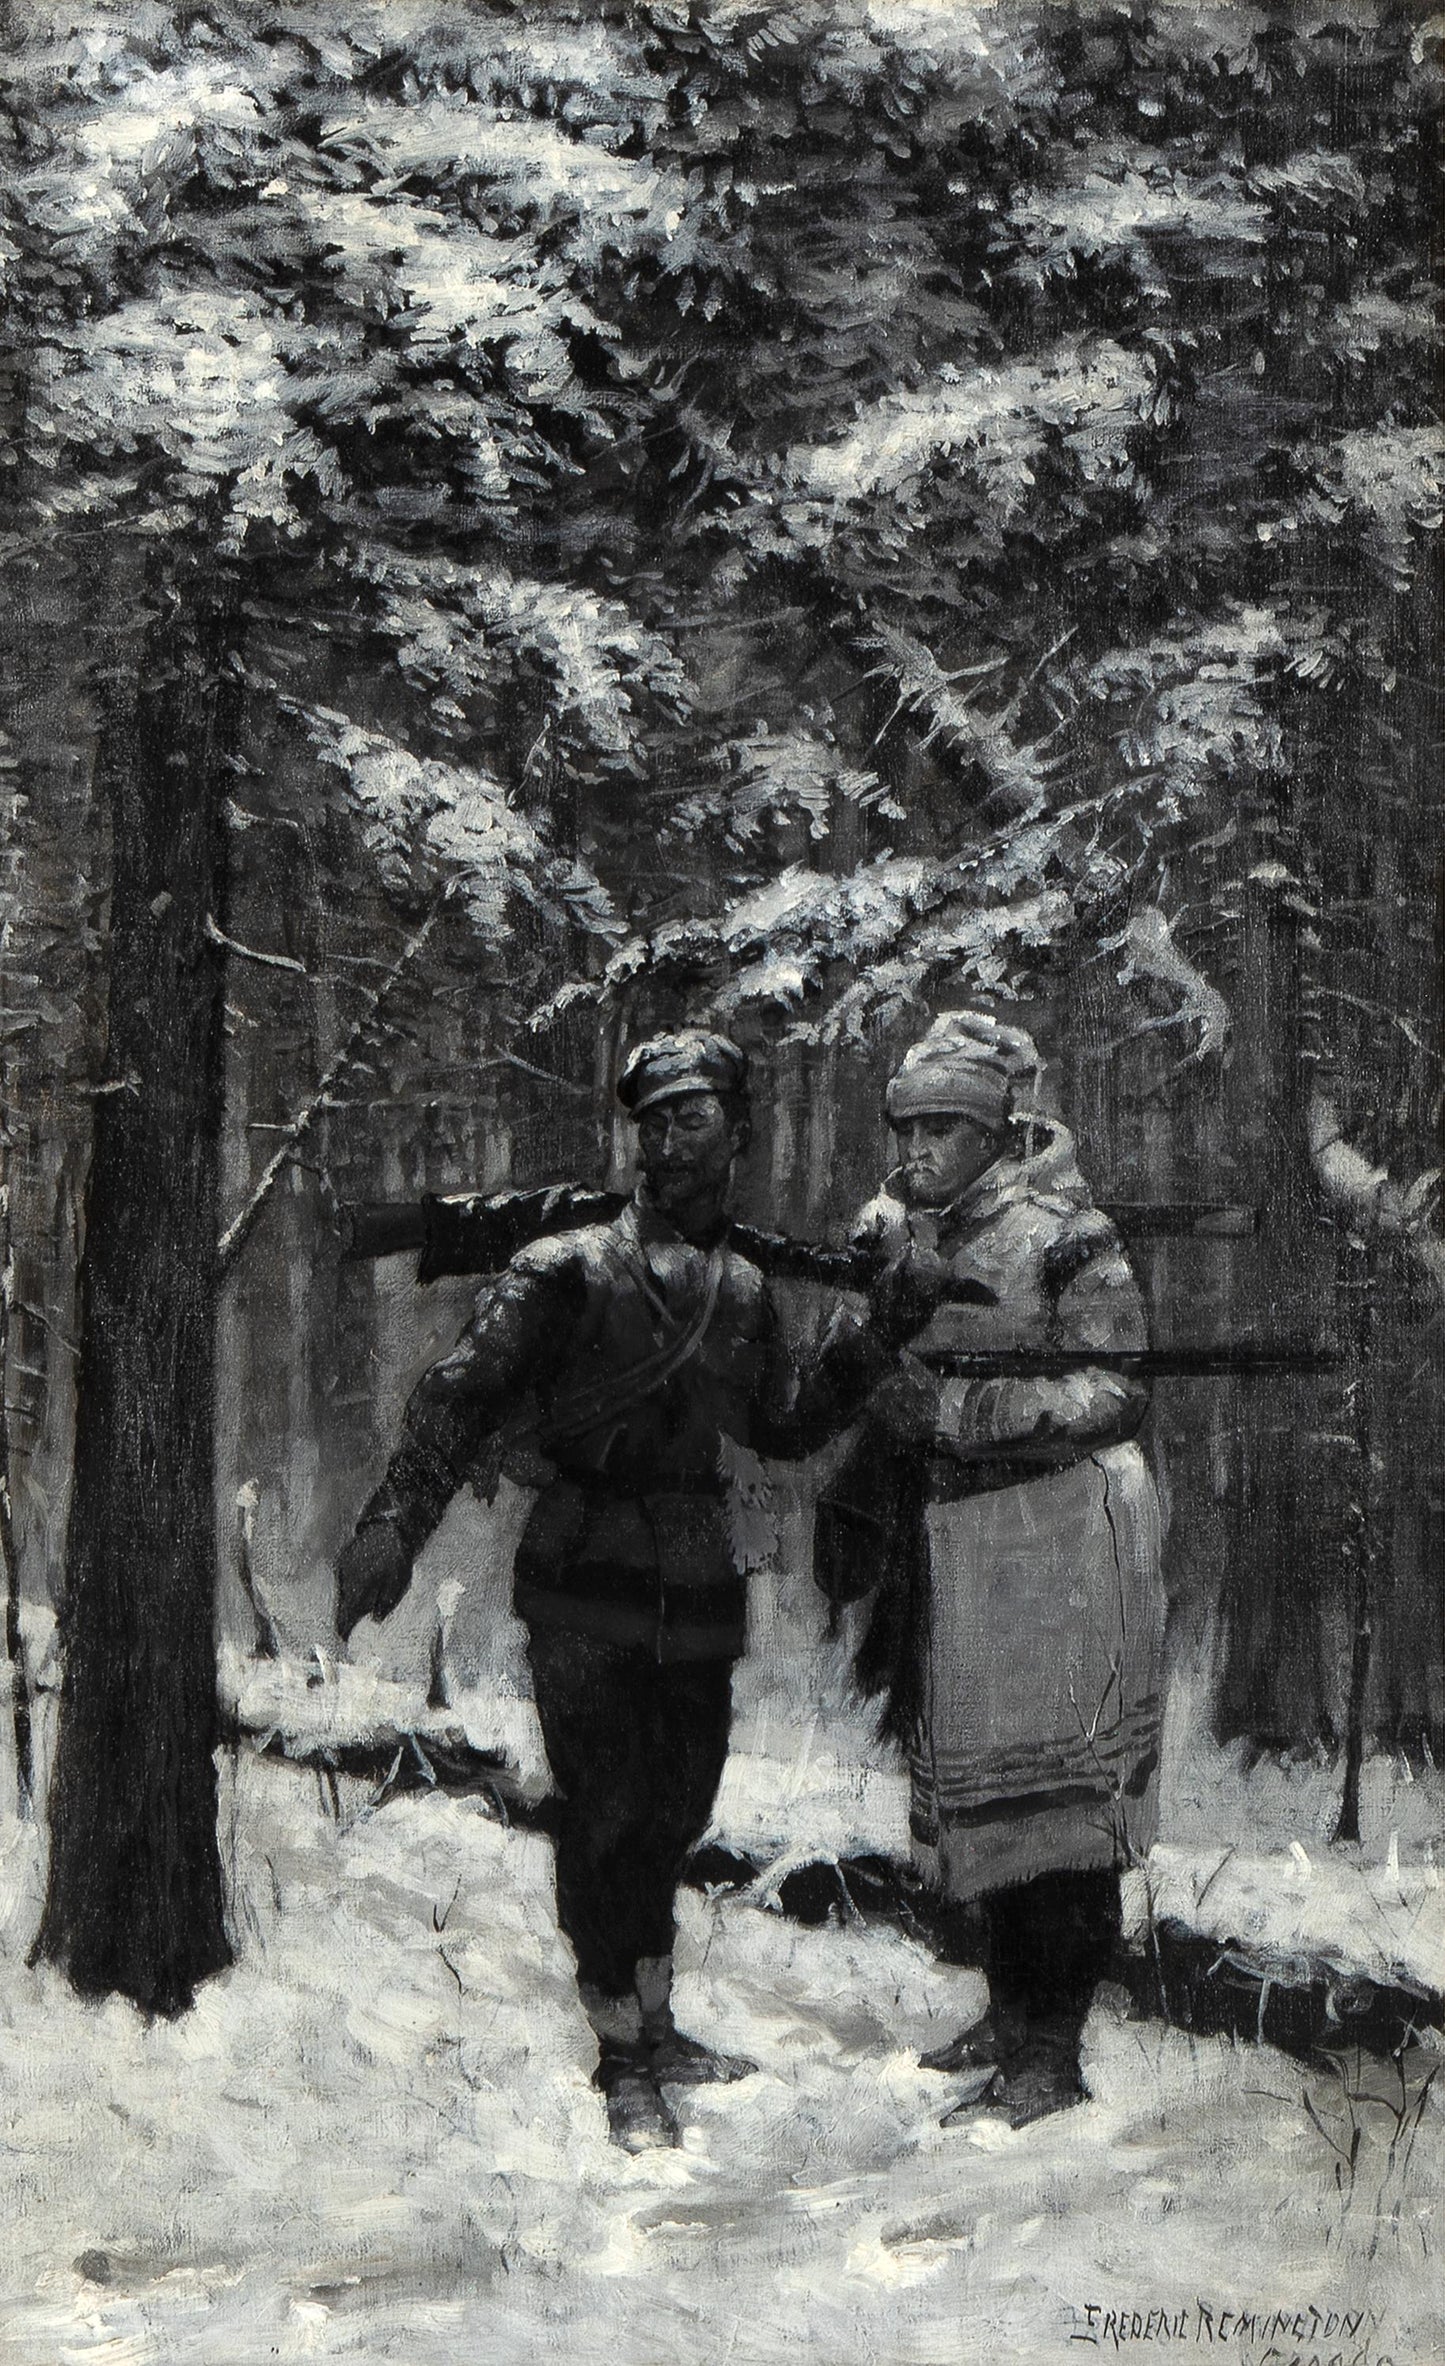 Frederic Remington - The Track in the Winter Forest 30.875" x 19.5"